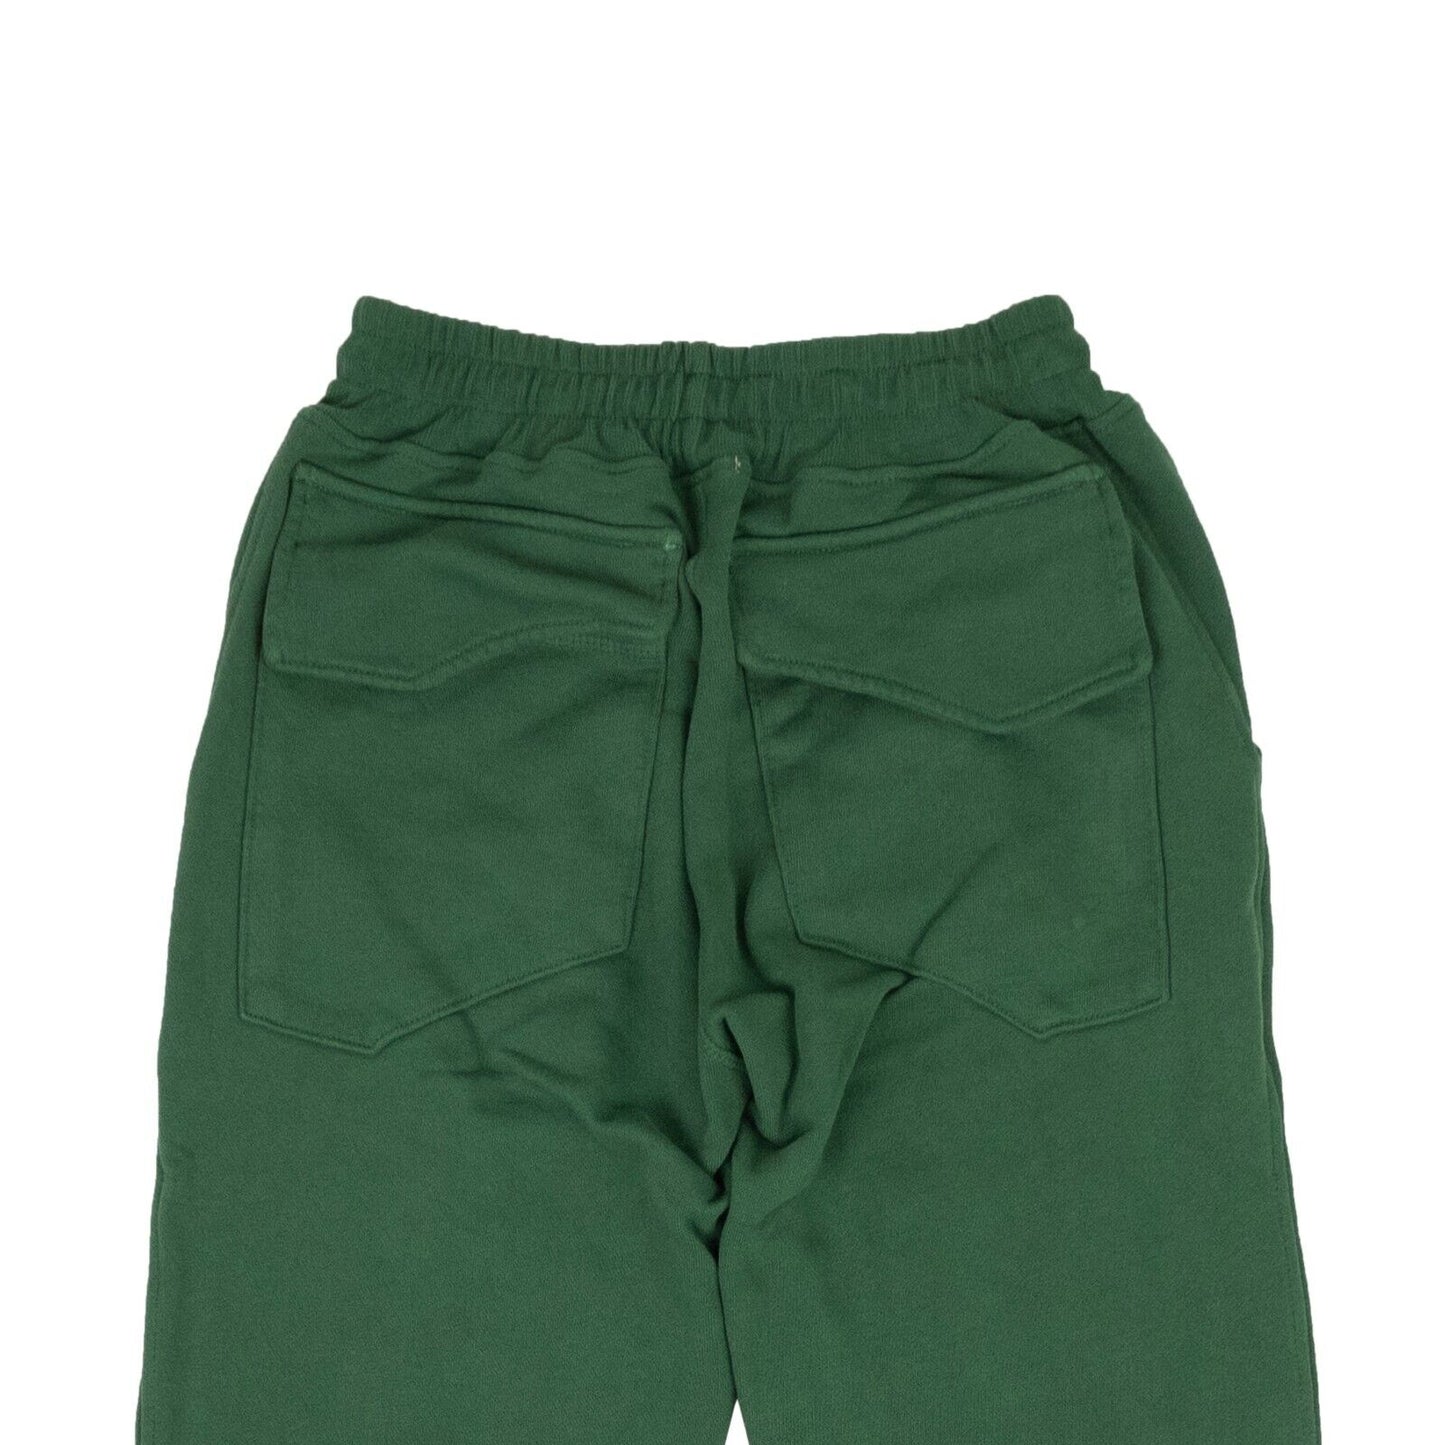 NWT RHUDE Forest Green Cotton Chenile Patch Sweatpants